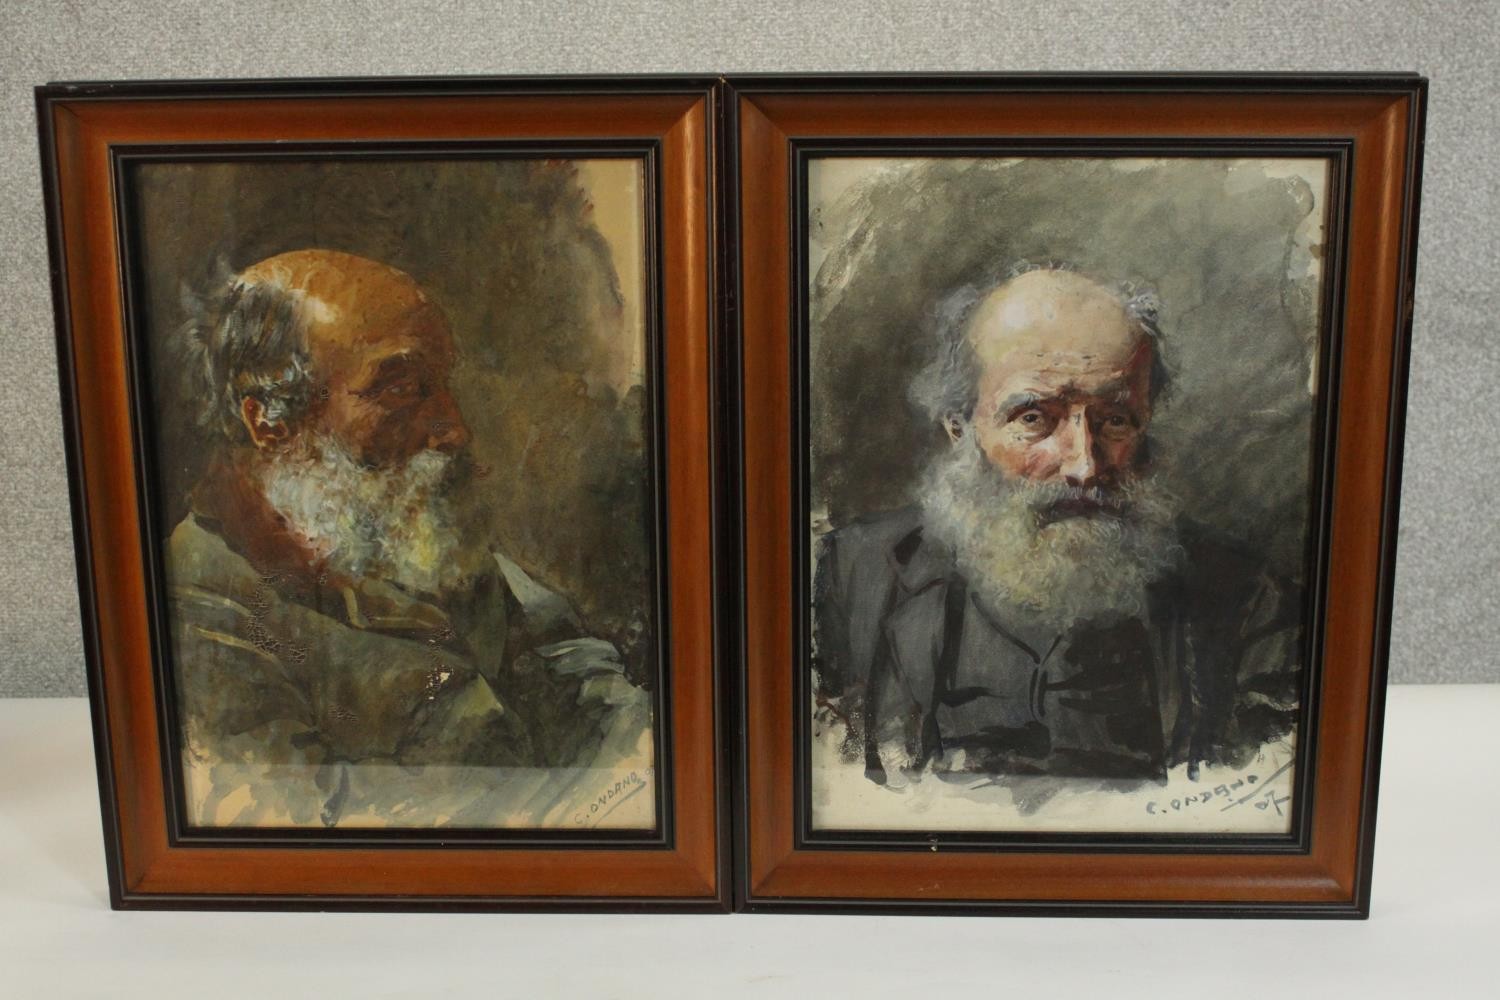 Two framed and glazed watercolour portraits of an old man with a beard, one from the side and one